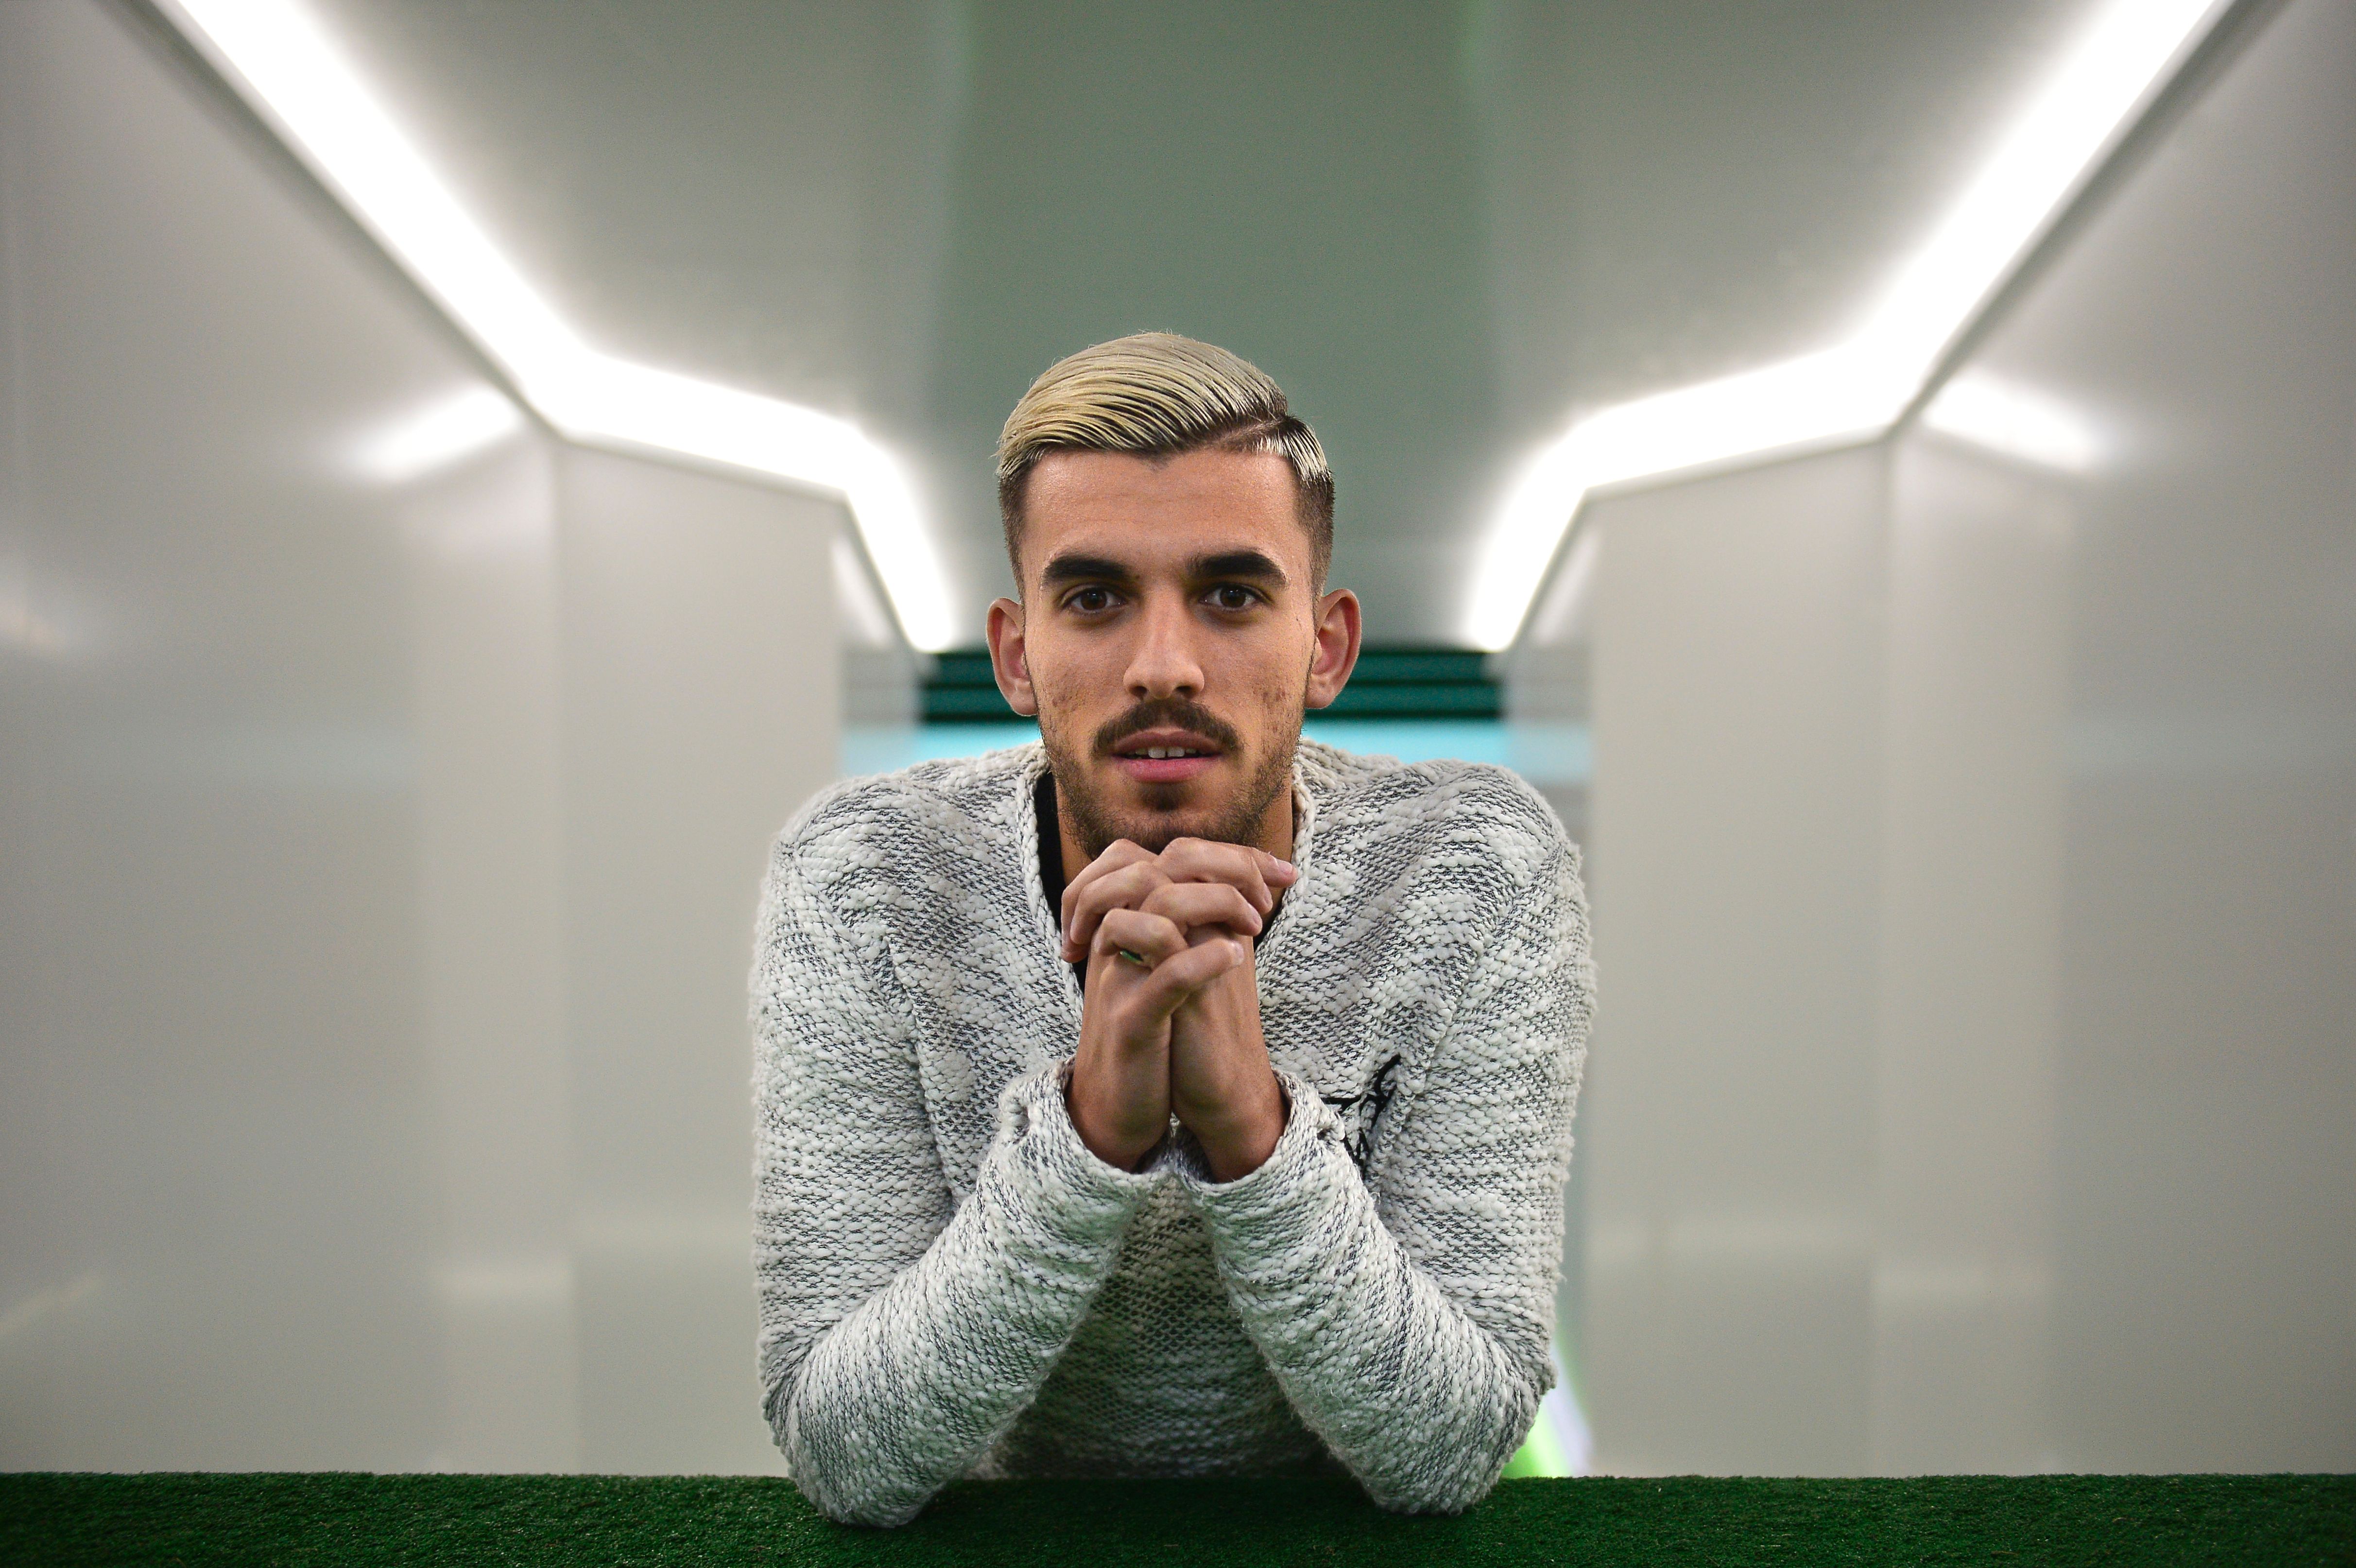 Betis' forward Dani Ceballos poses at the Benito Villamarin stadium, in Sevilla on February 8, 2017.

Seville has two faces: those who like the Holy Week, attending the religious precessions, and those who prefer the April Fair, a spring festival on a flamenco air, between flounced dresses and Traditional outfits. And then there are those who love the green and white of Real Betis Balompie and those who prefer the red and white of Sevilla FC. / AFP / CRISTINA QUICLER        (Photo credit should read CRISTINA QUICLER/AFP/Getty Images)